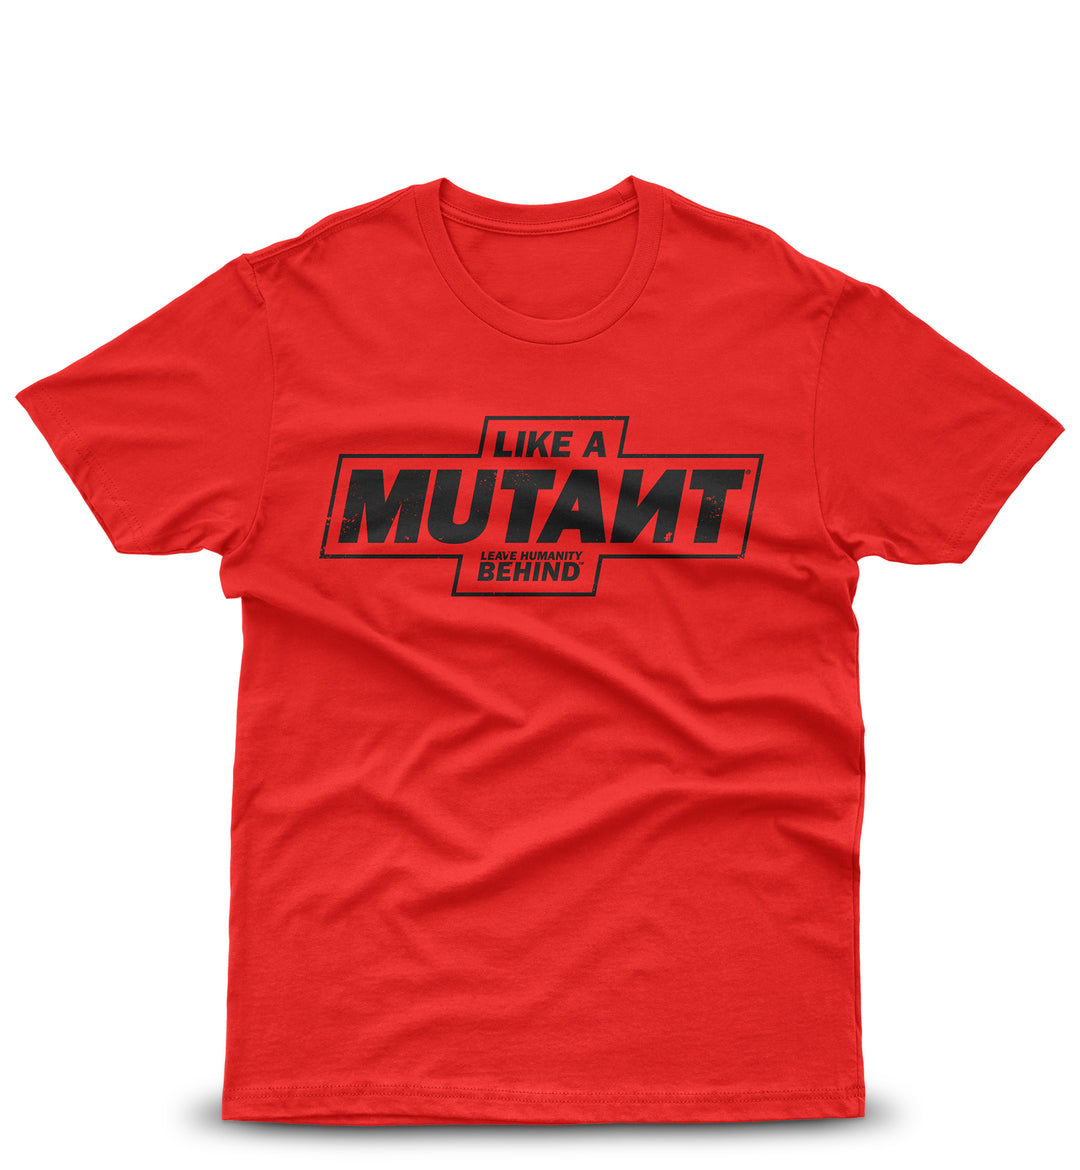 The front view of the red 'MUTANT's Truck Month' t-shirt featuring the 'Like a Mutant' phrase and the 'Leave Humanity Behind' tagline in black, displayed against a white background.